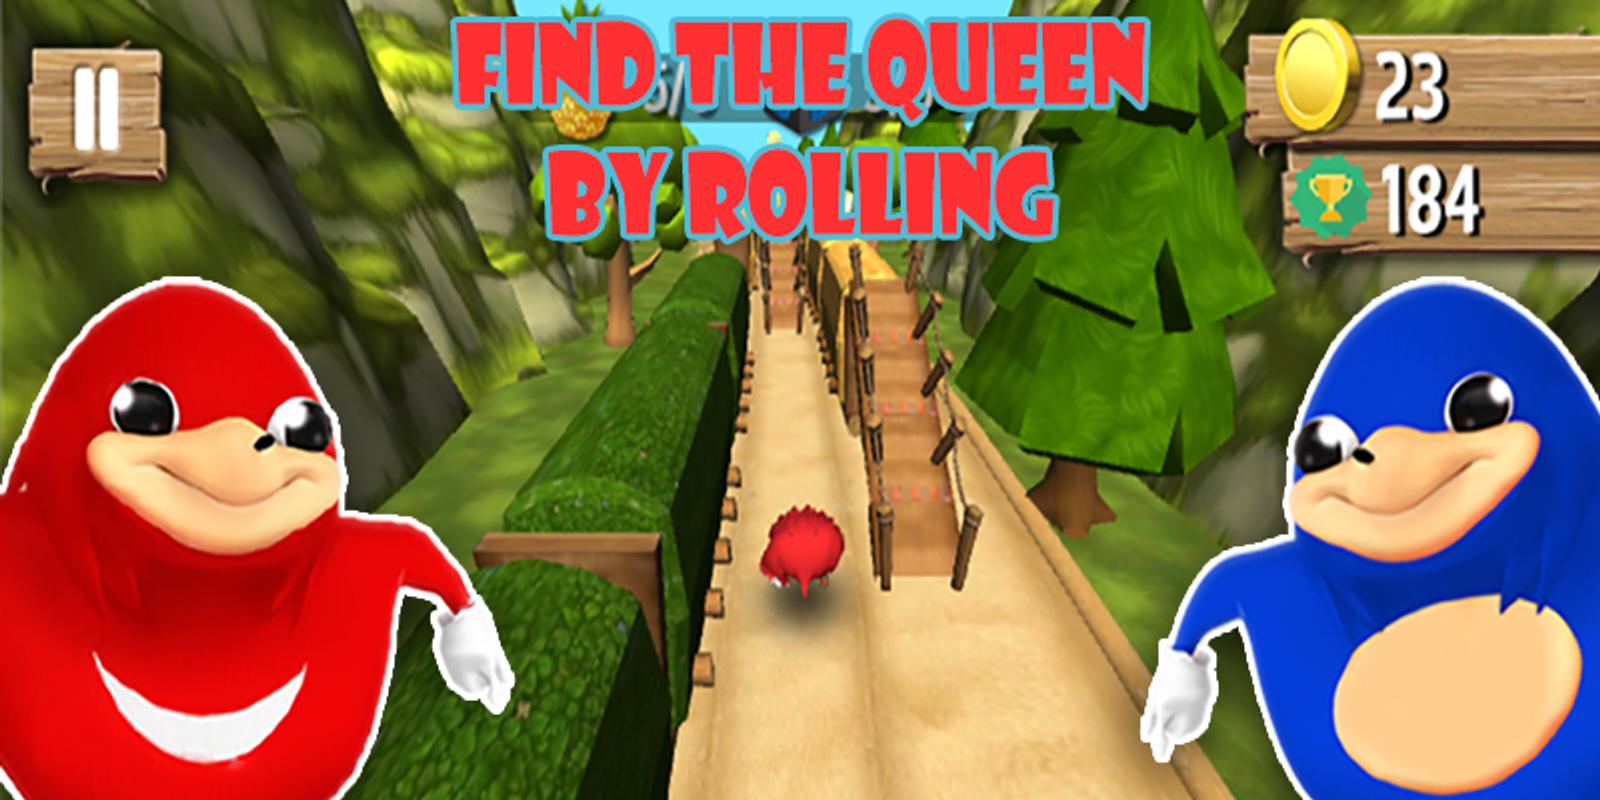 Do you know the way download game free